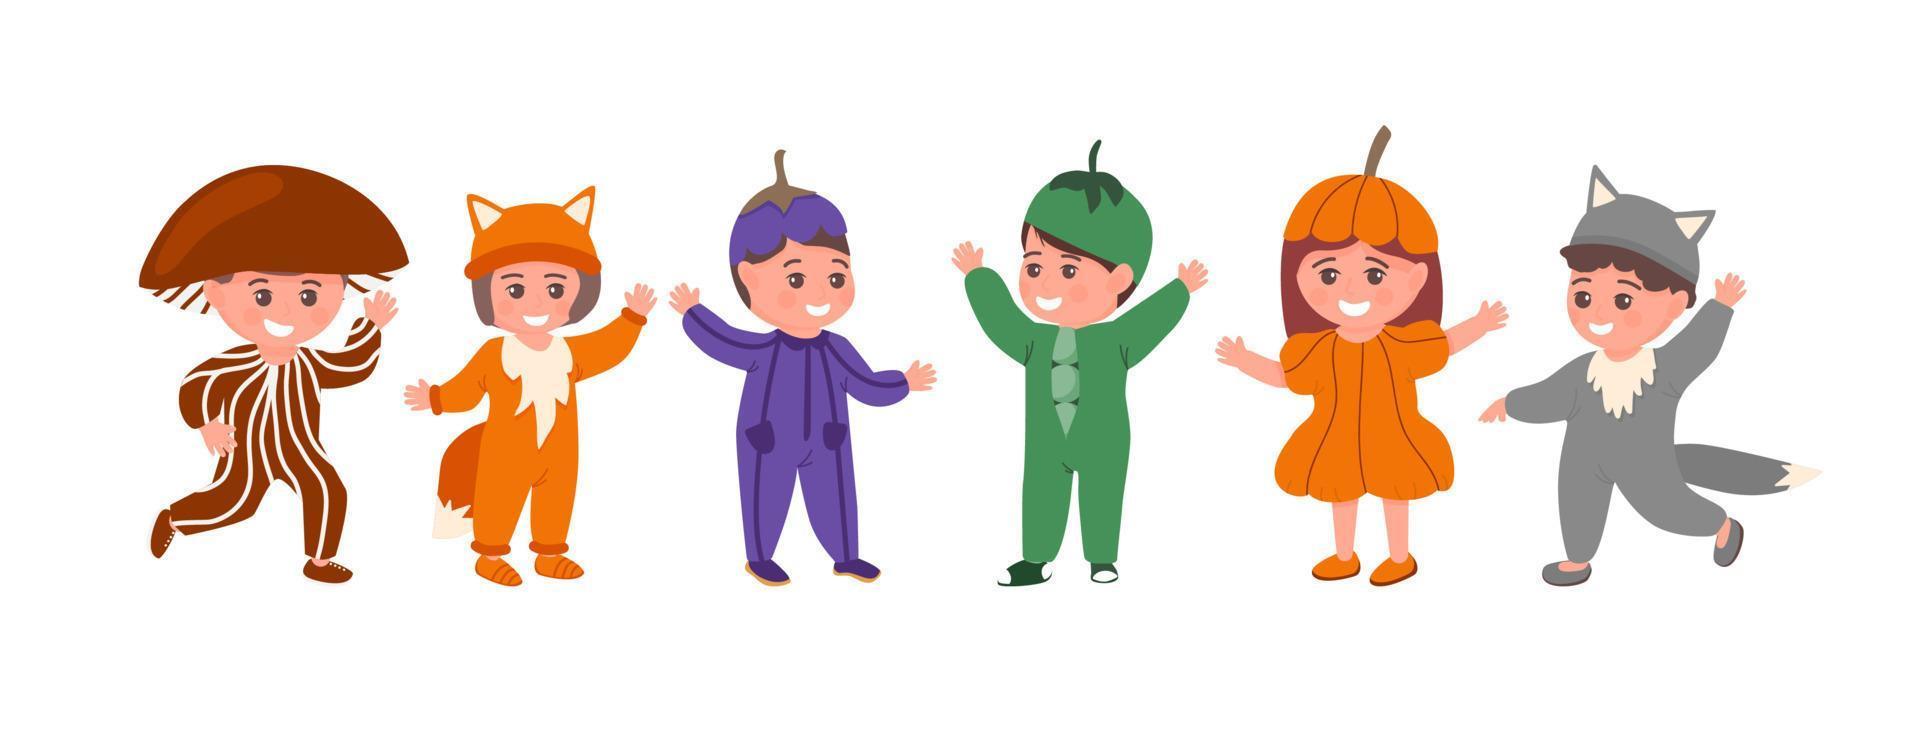 Set of kids in funny animal or vegetable costumes isolated flat vector illustration. Happy children celebrating carnivals. Adorable girls and boys dressed in Halloween party clothes.